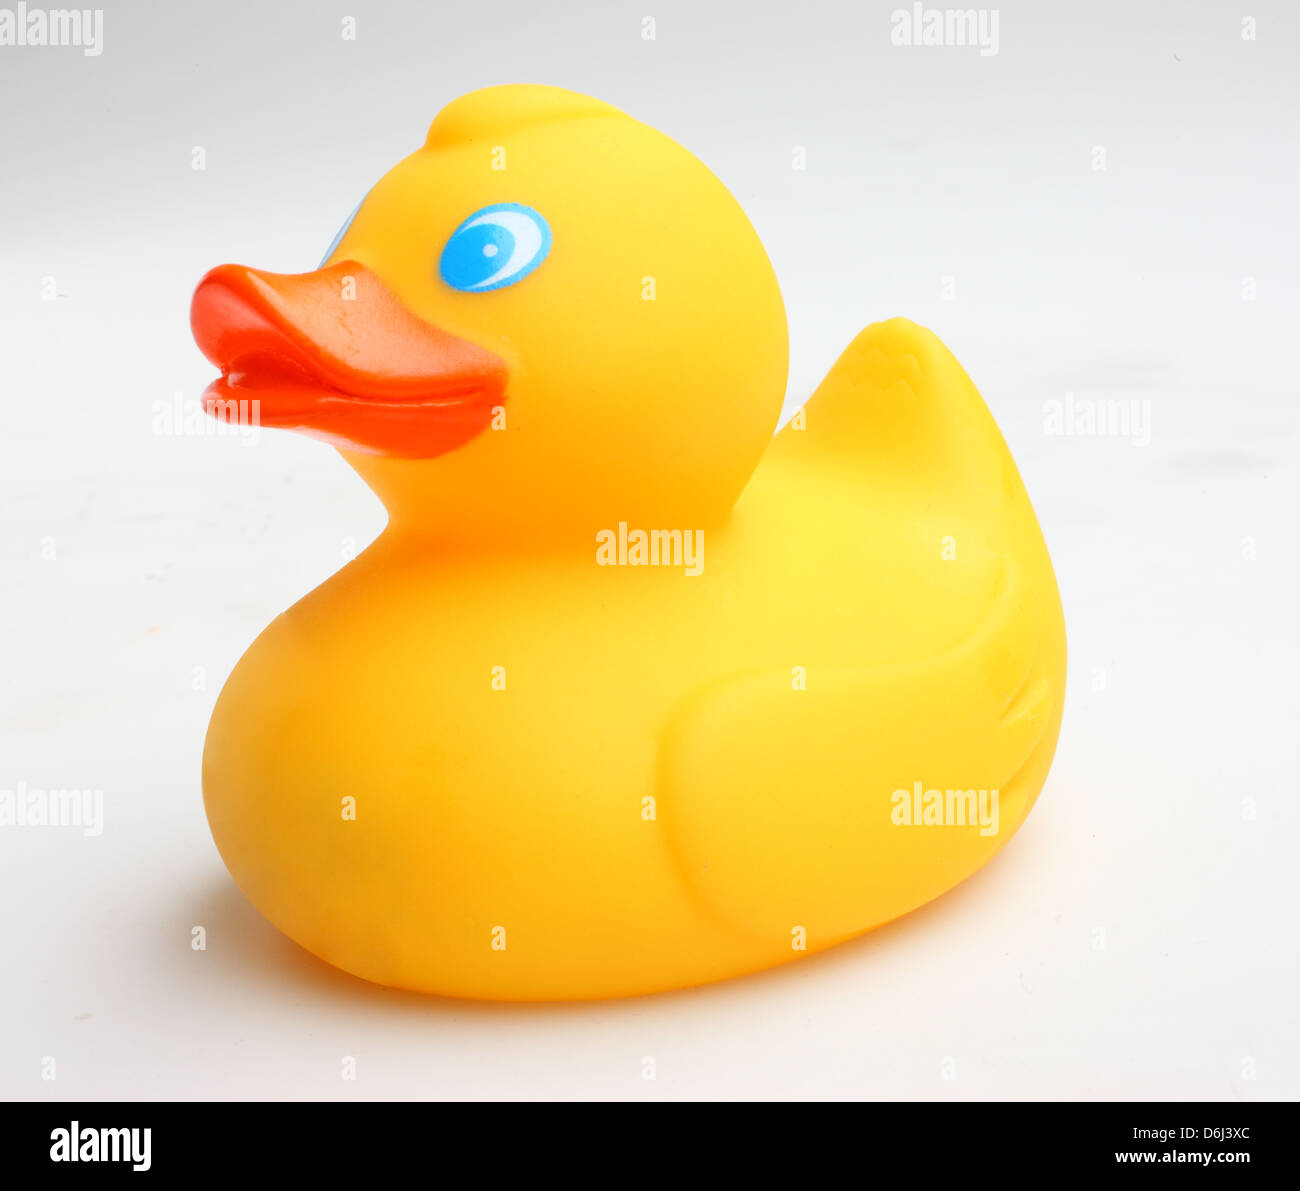 Yellow rubber Duck with blue eyes and orange beak on white background side view Stock Photo